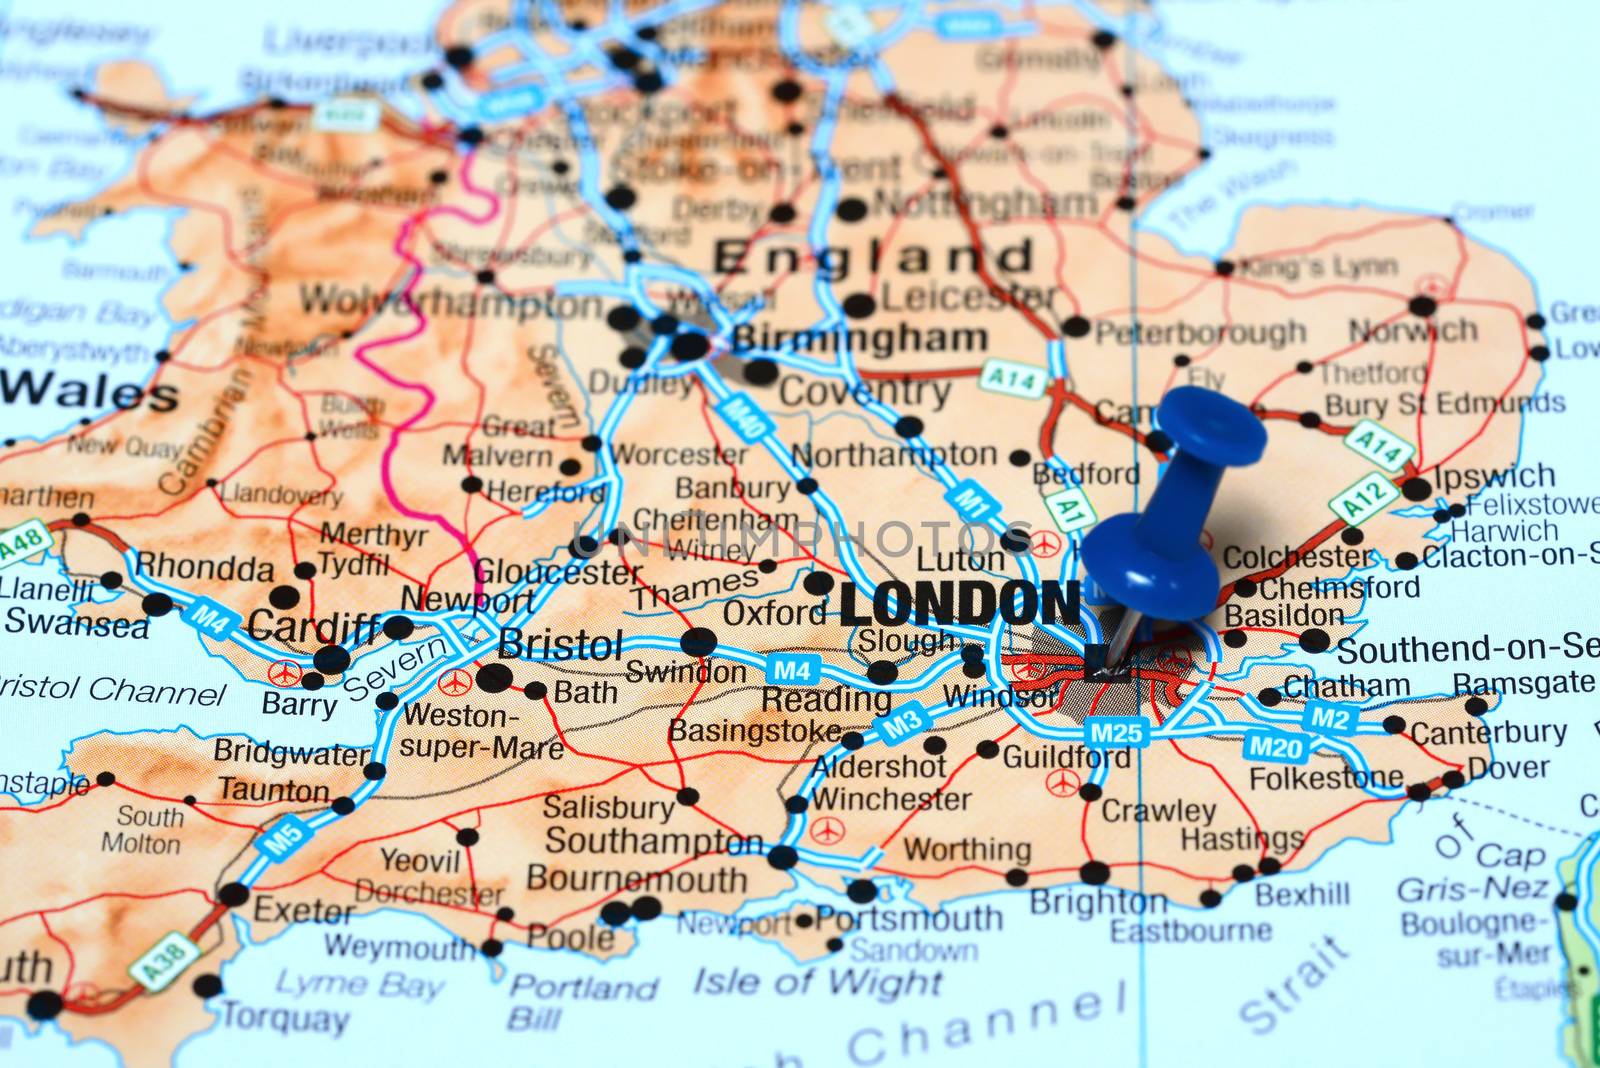 Photo of pinned London on a map of europe. May be used as illustration for traveling theme.